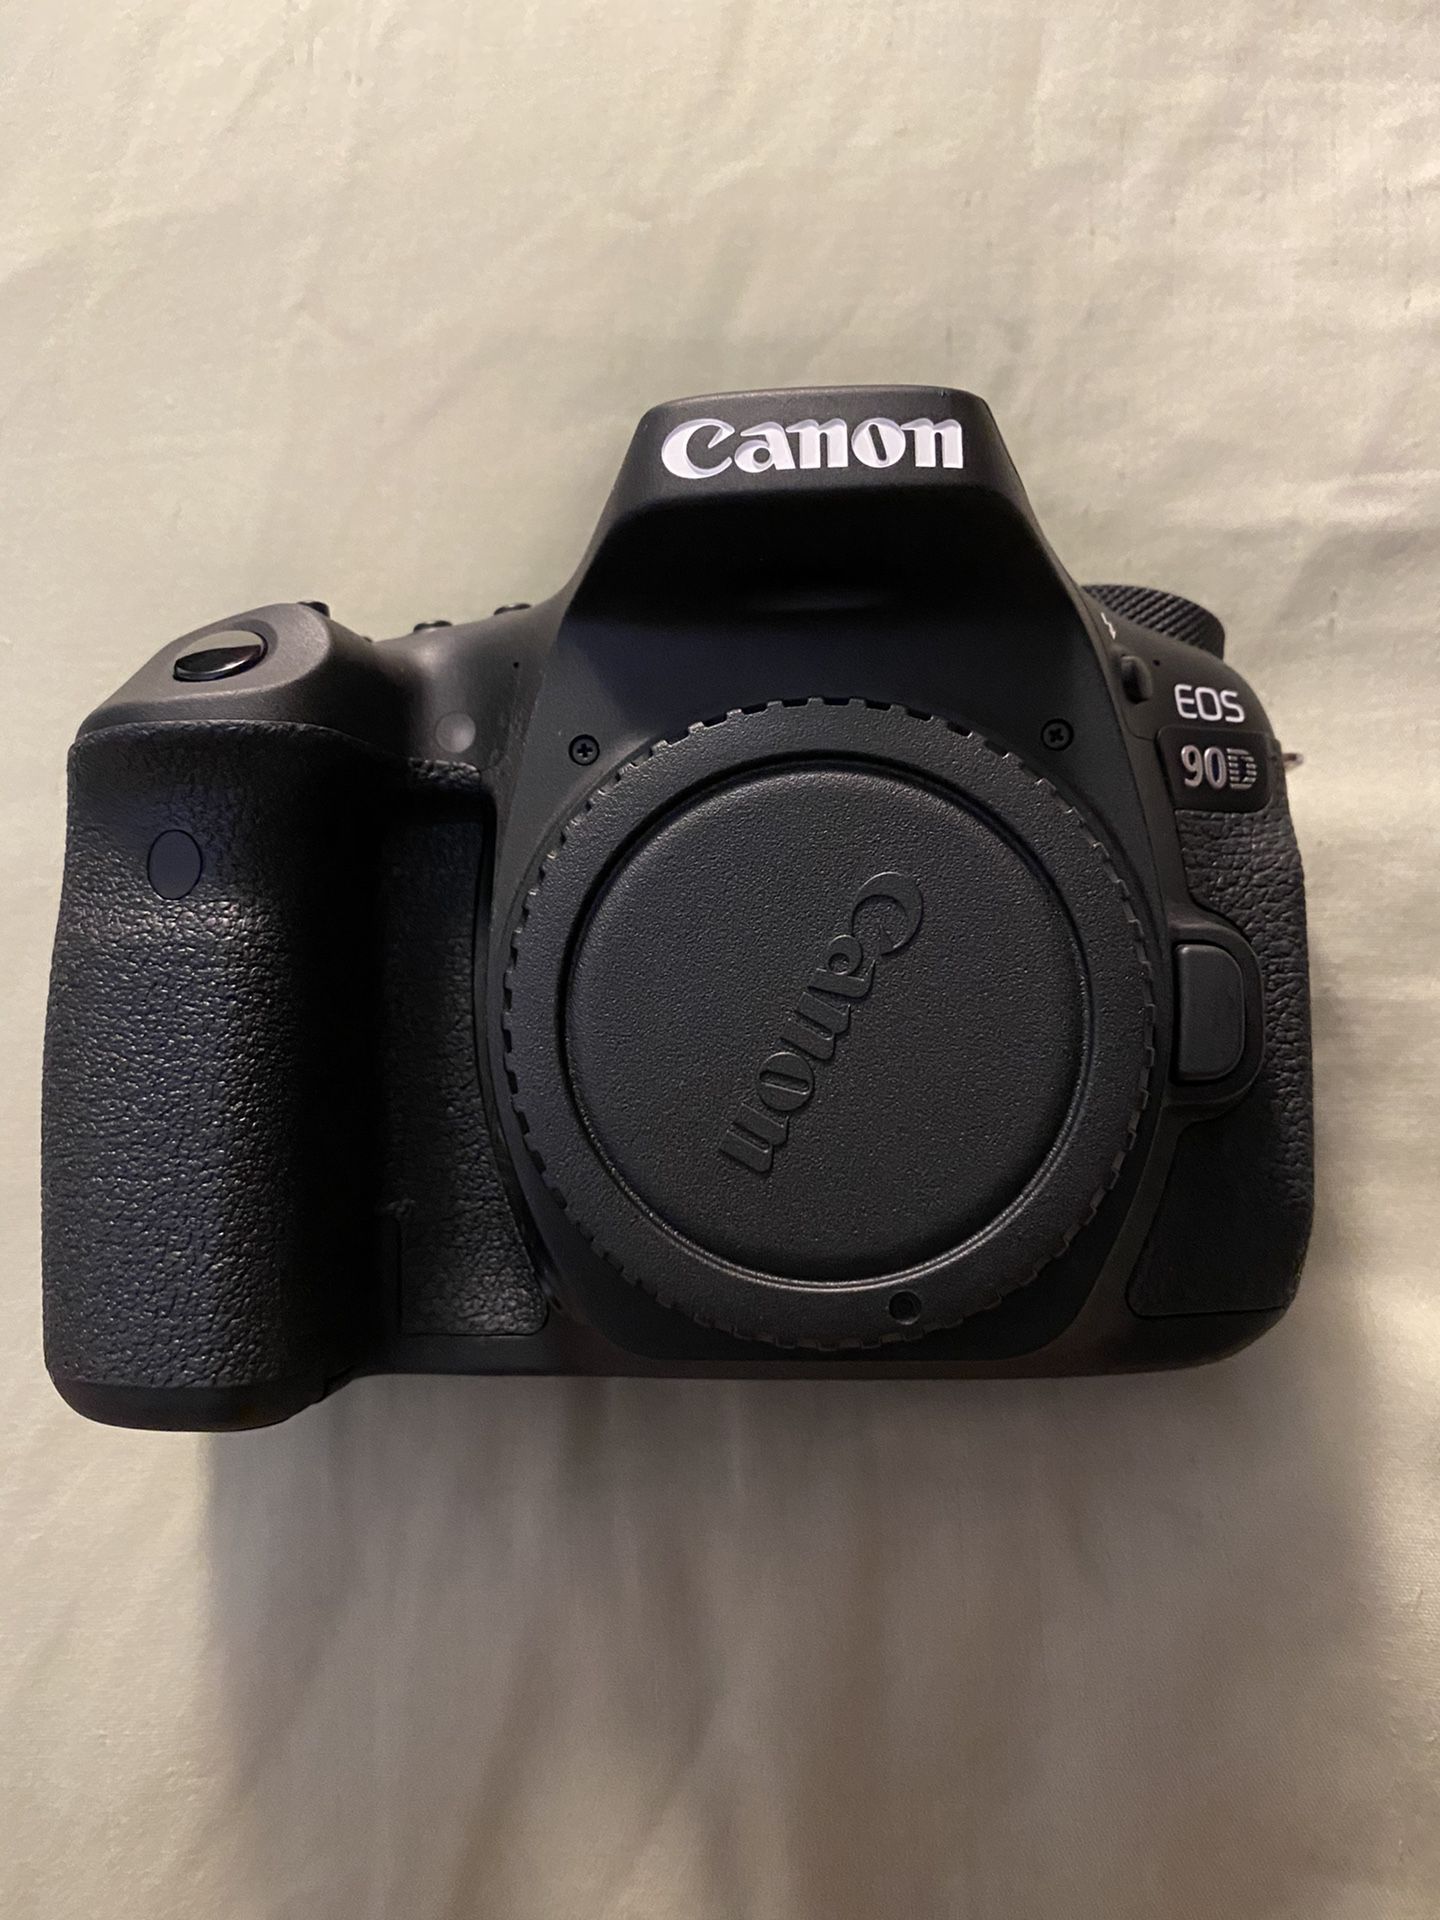 Canon 90D with lenses and accessories